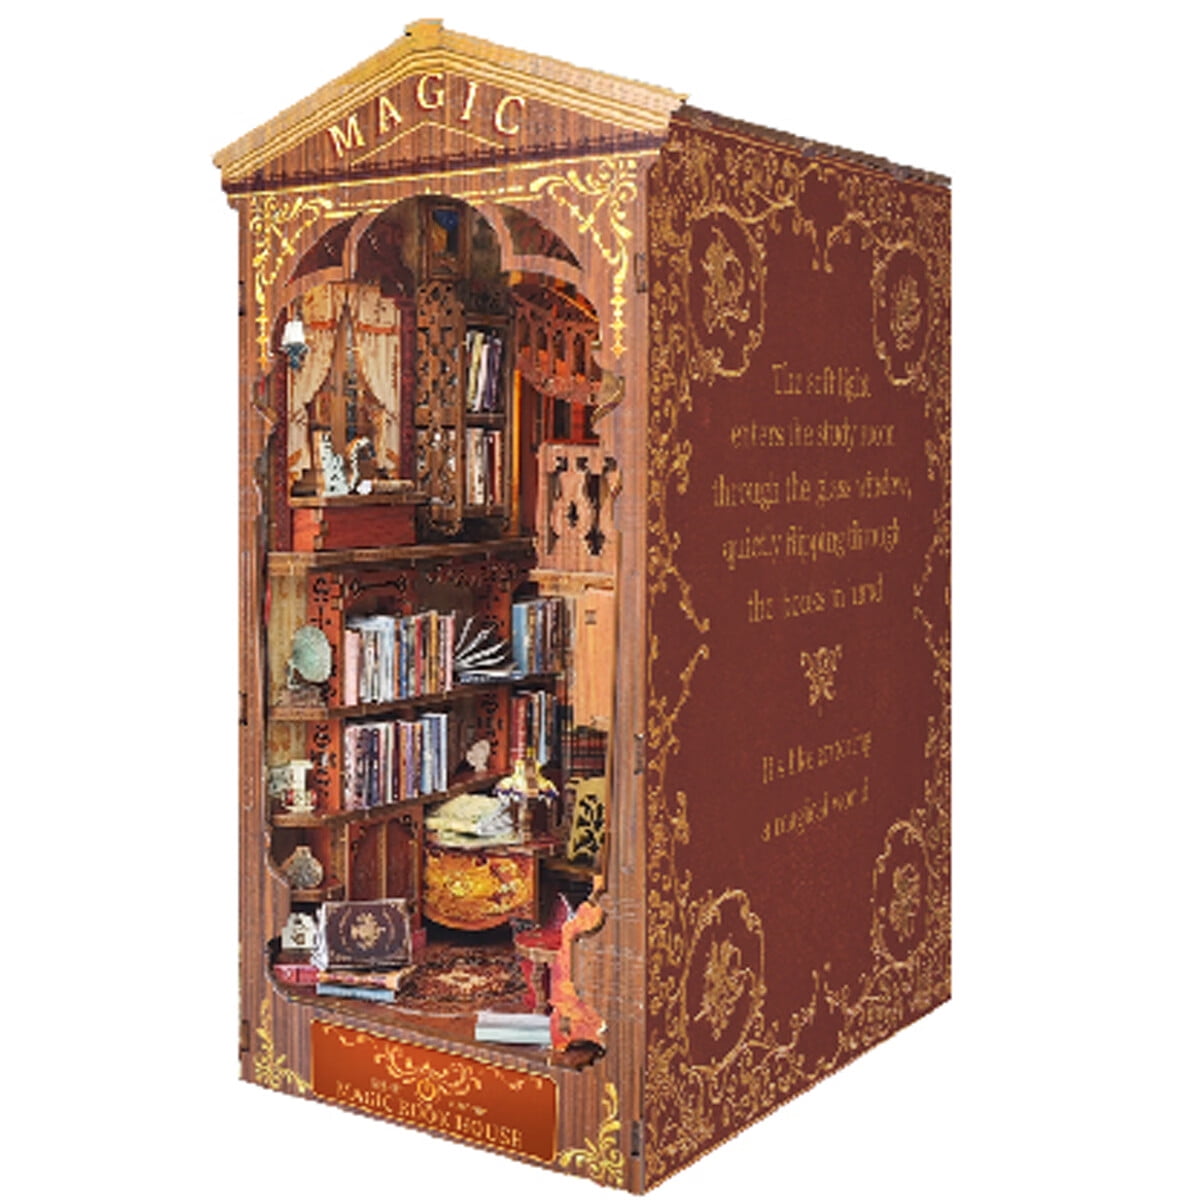 Luejnbogty DIY Book Nook Kit, Fantasy 3D Wooden Bookend for Bookshelf  Decor, with Light Model Kits for Adults : : Home & Kitchen